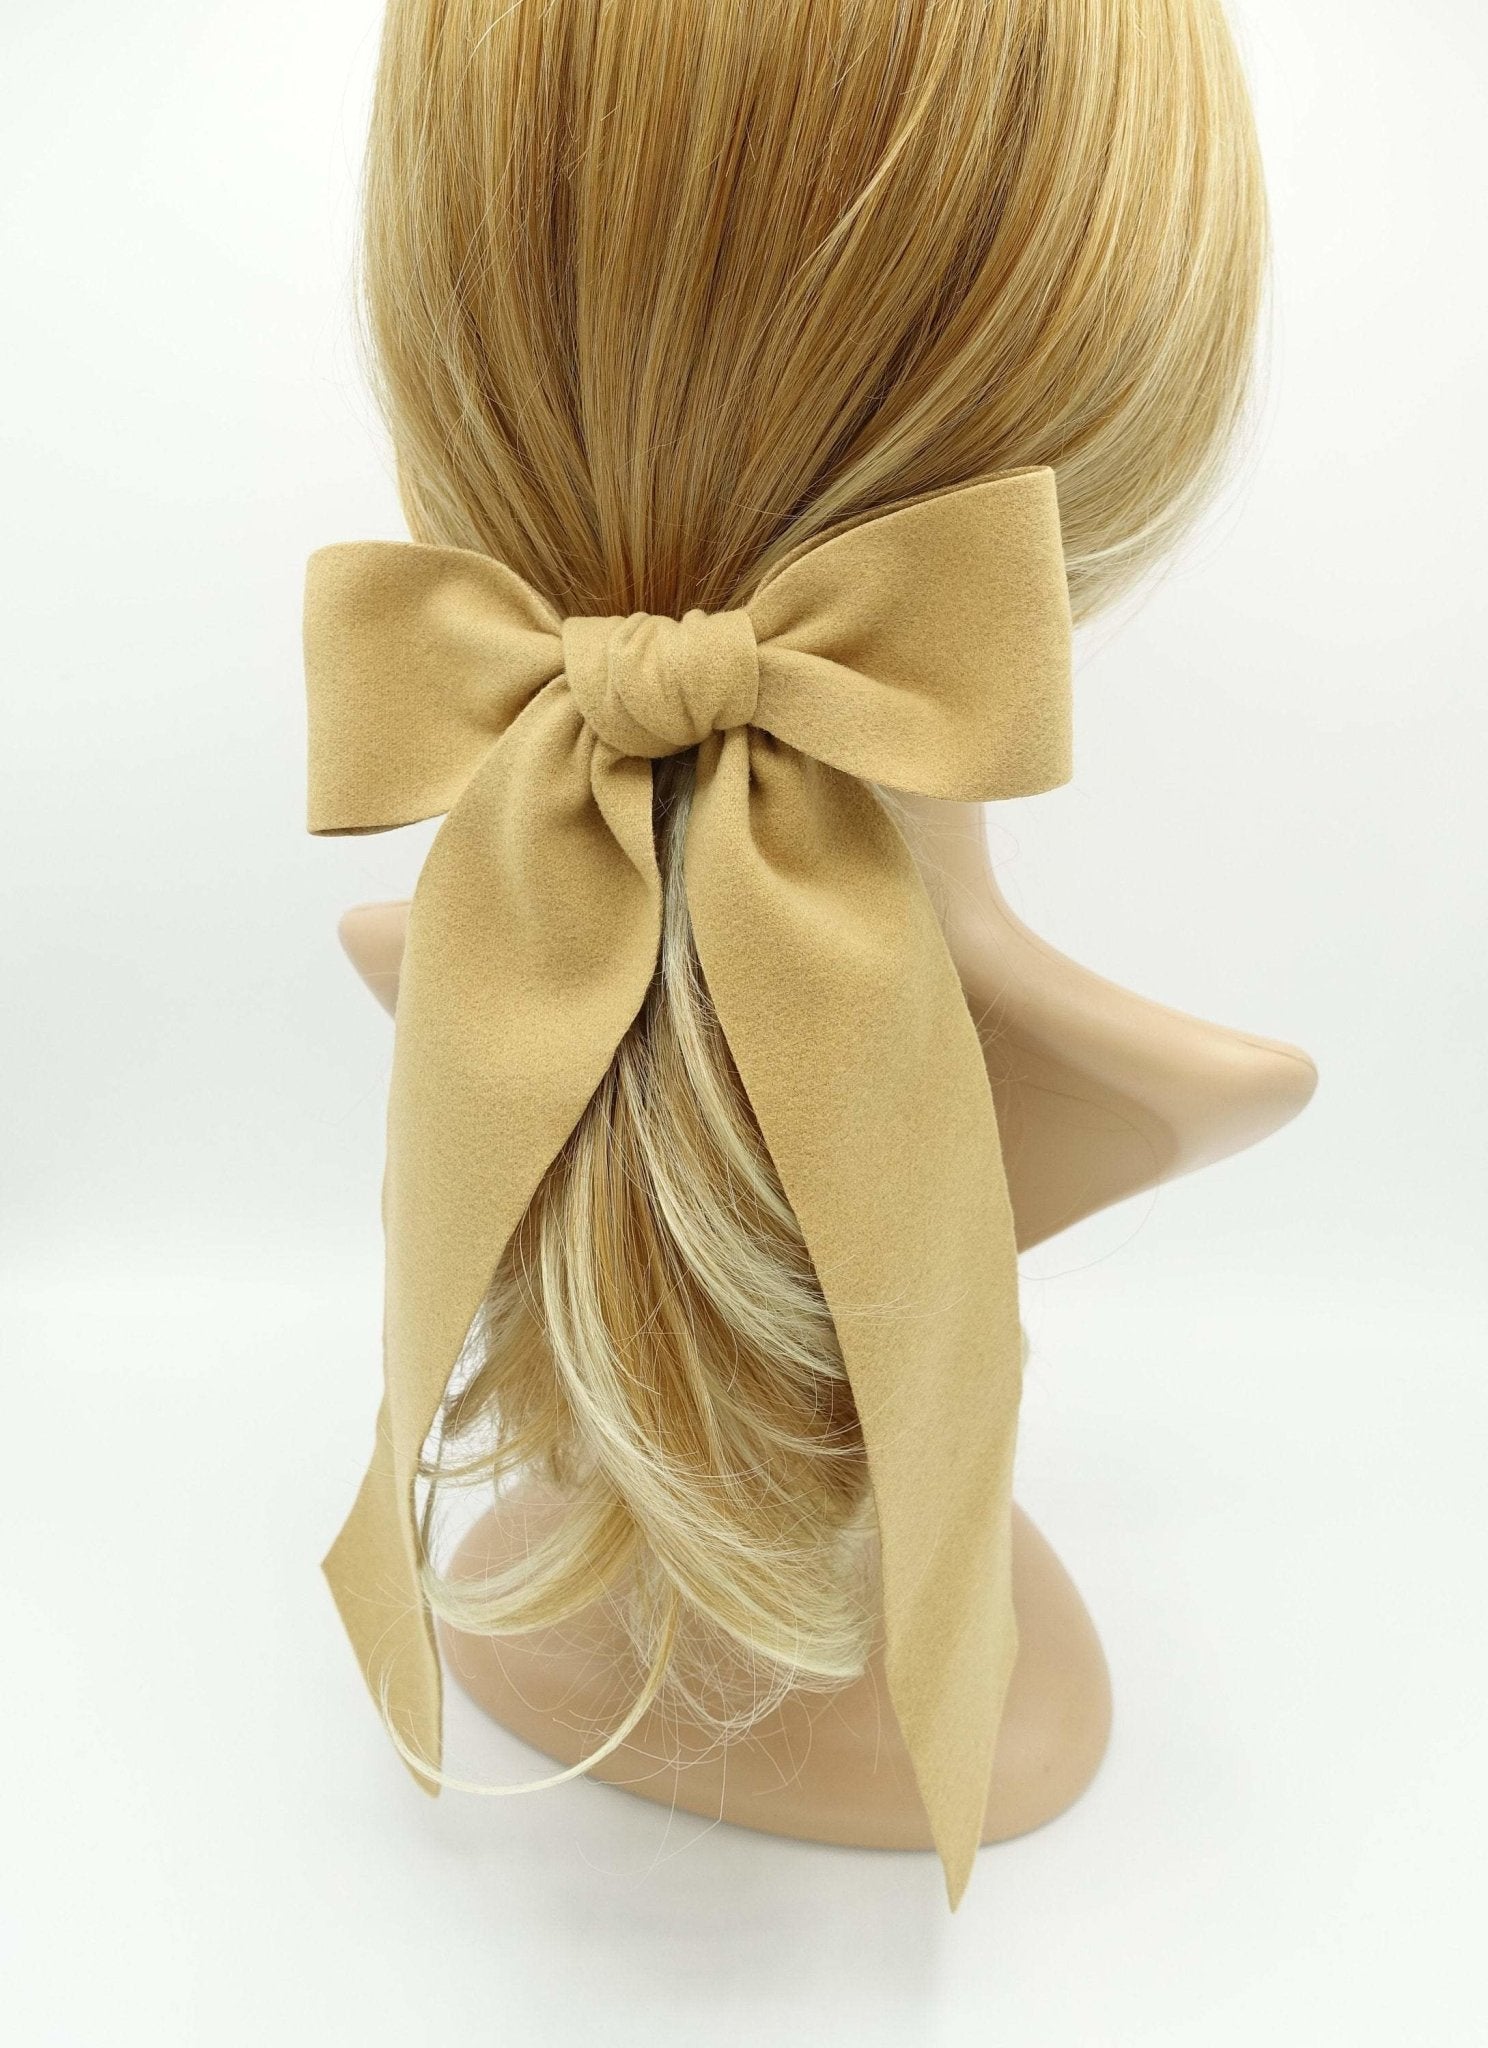 veryshine.com Barrettes & Clips Camel beige long tail woolen hair bow stylish accessory for women